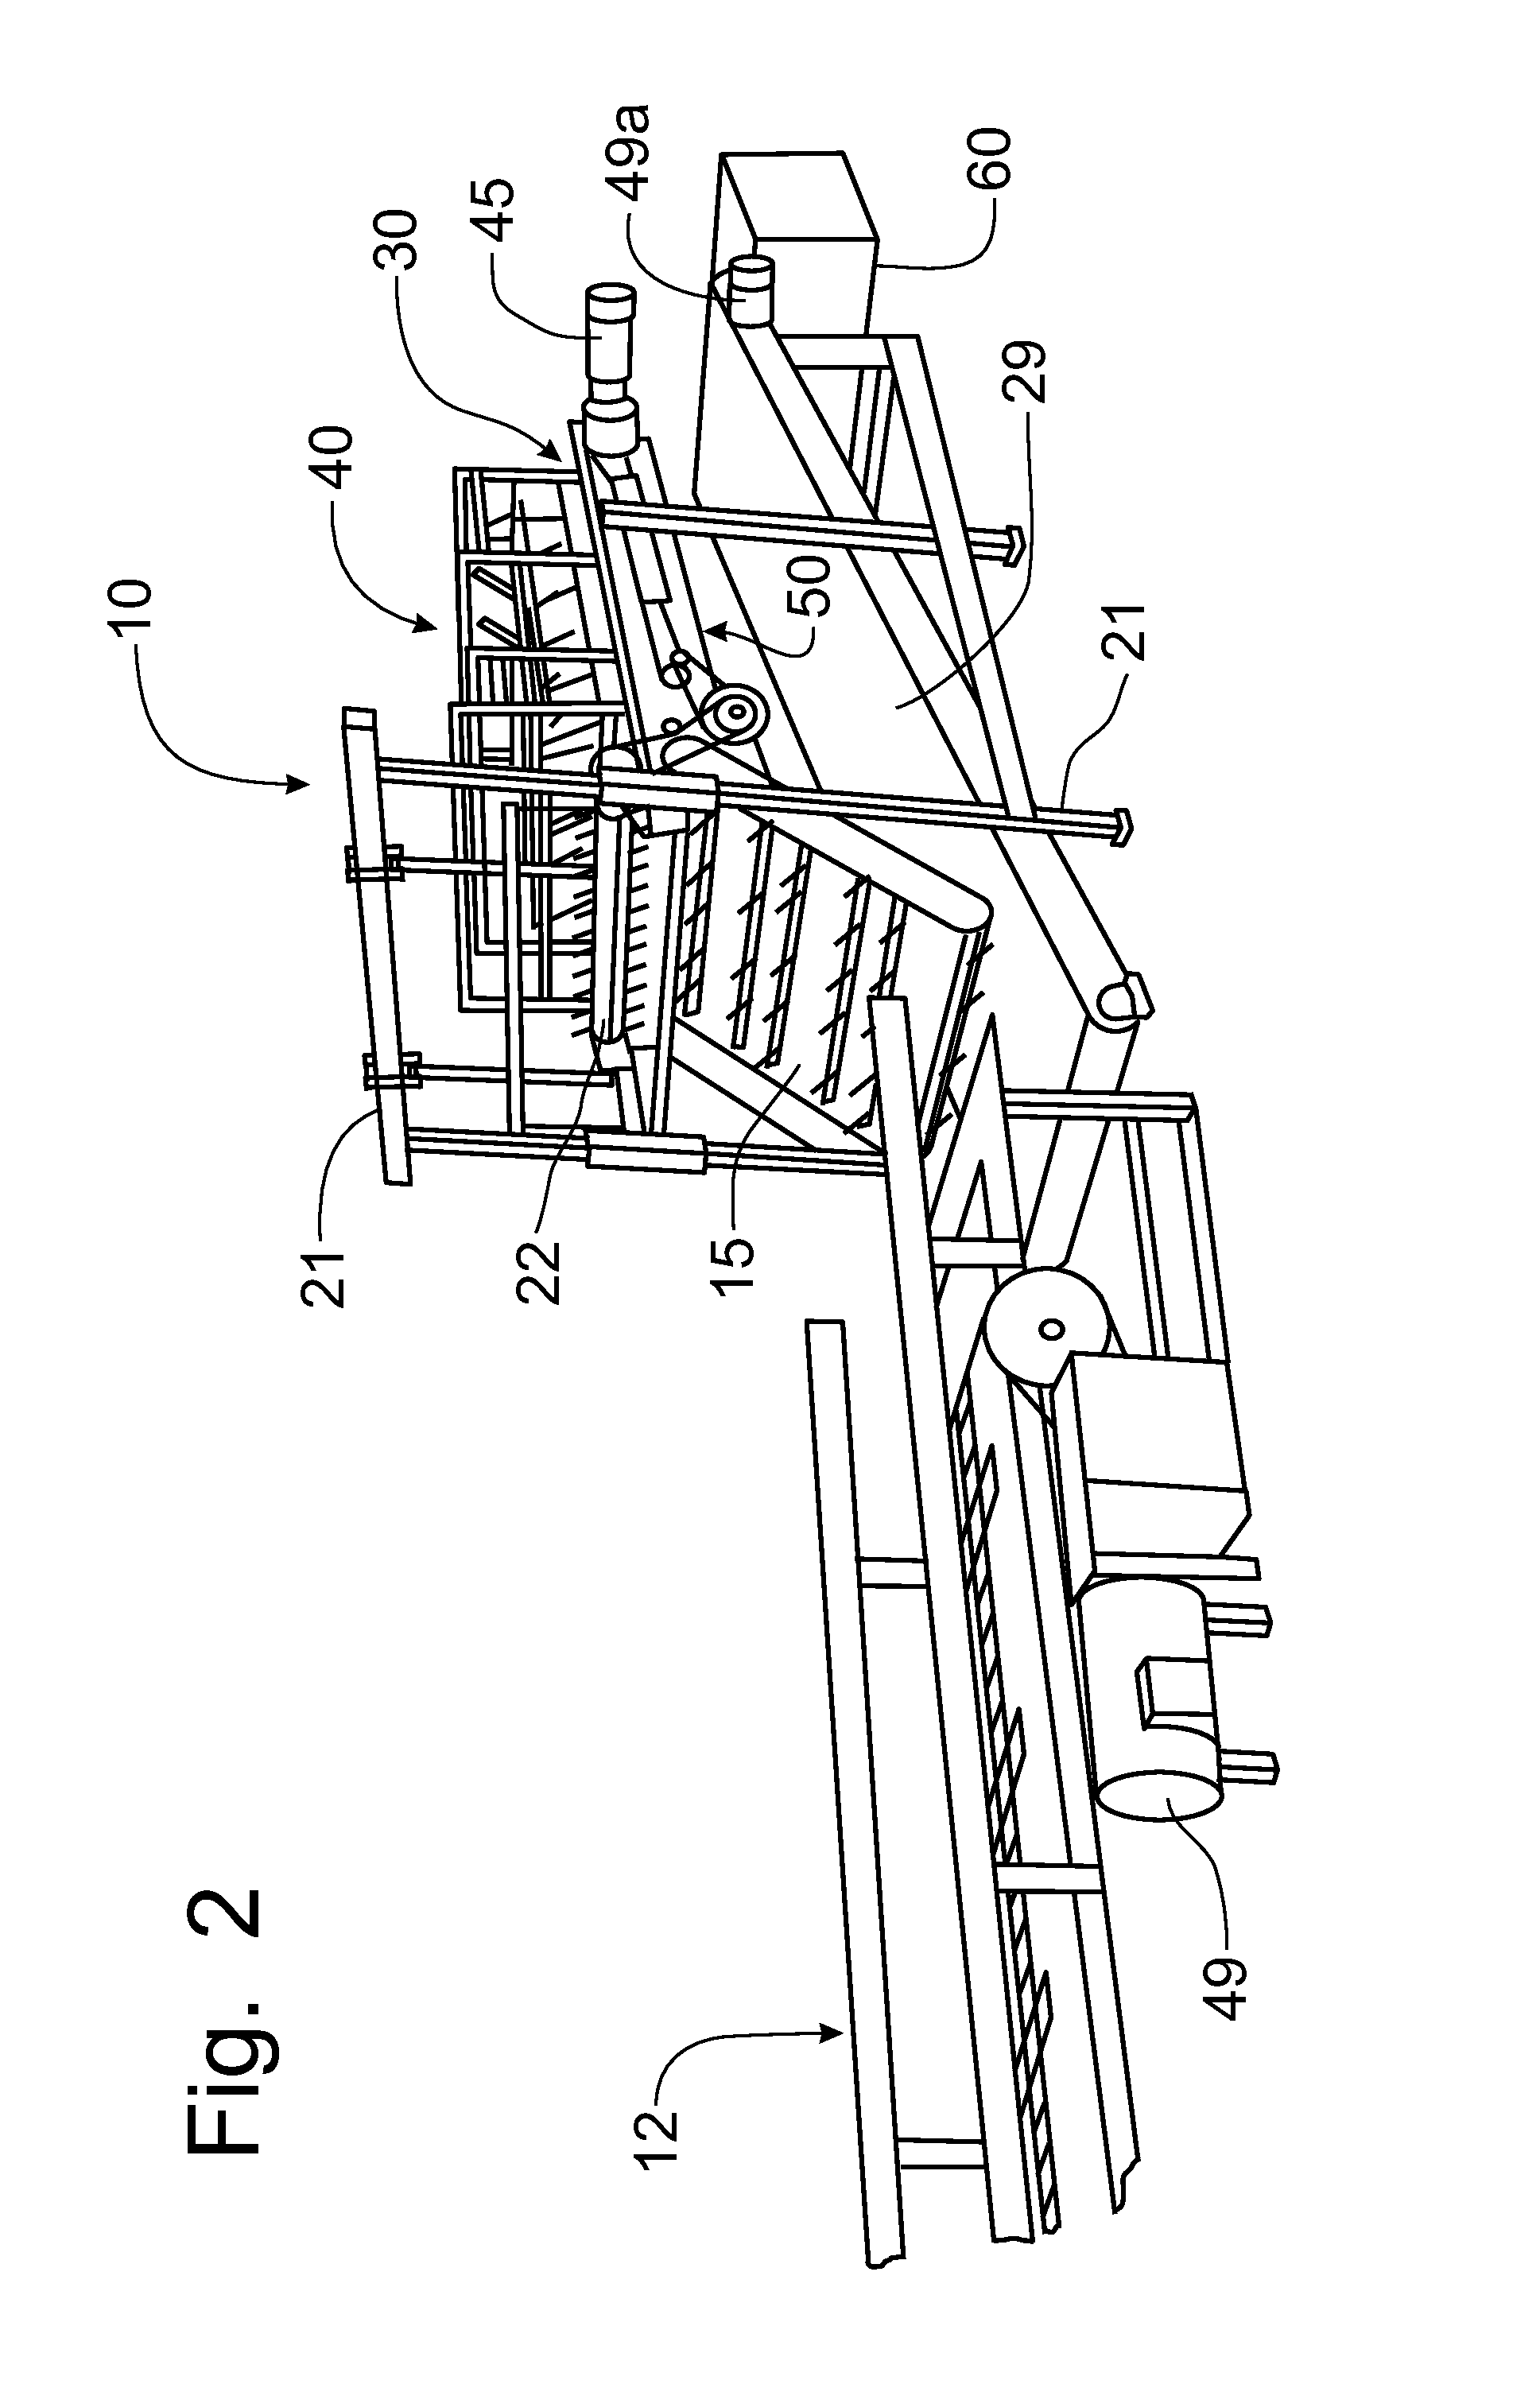 Apparatus for Converting Large Bales of Forage Material into Small Rectangular Bales of Forage Material